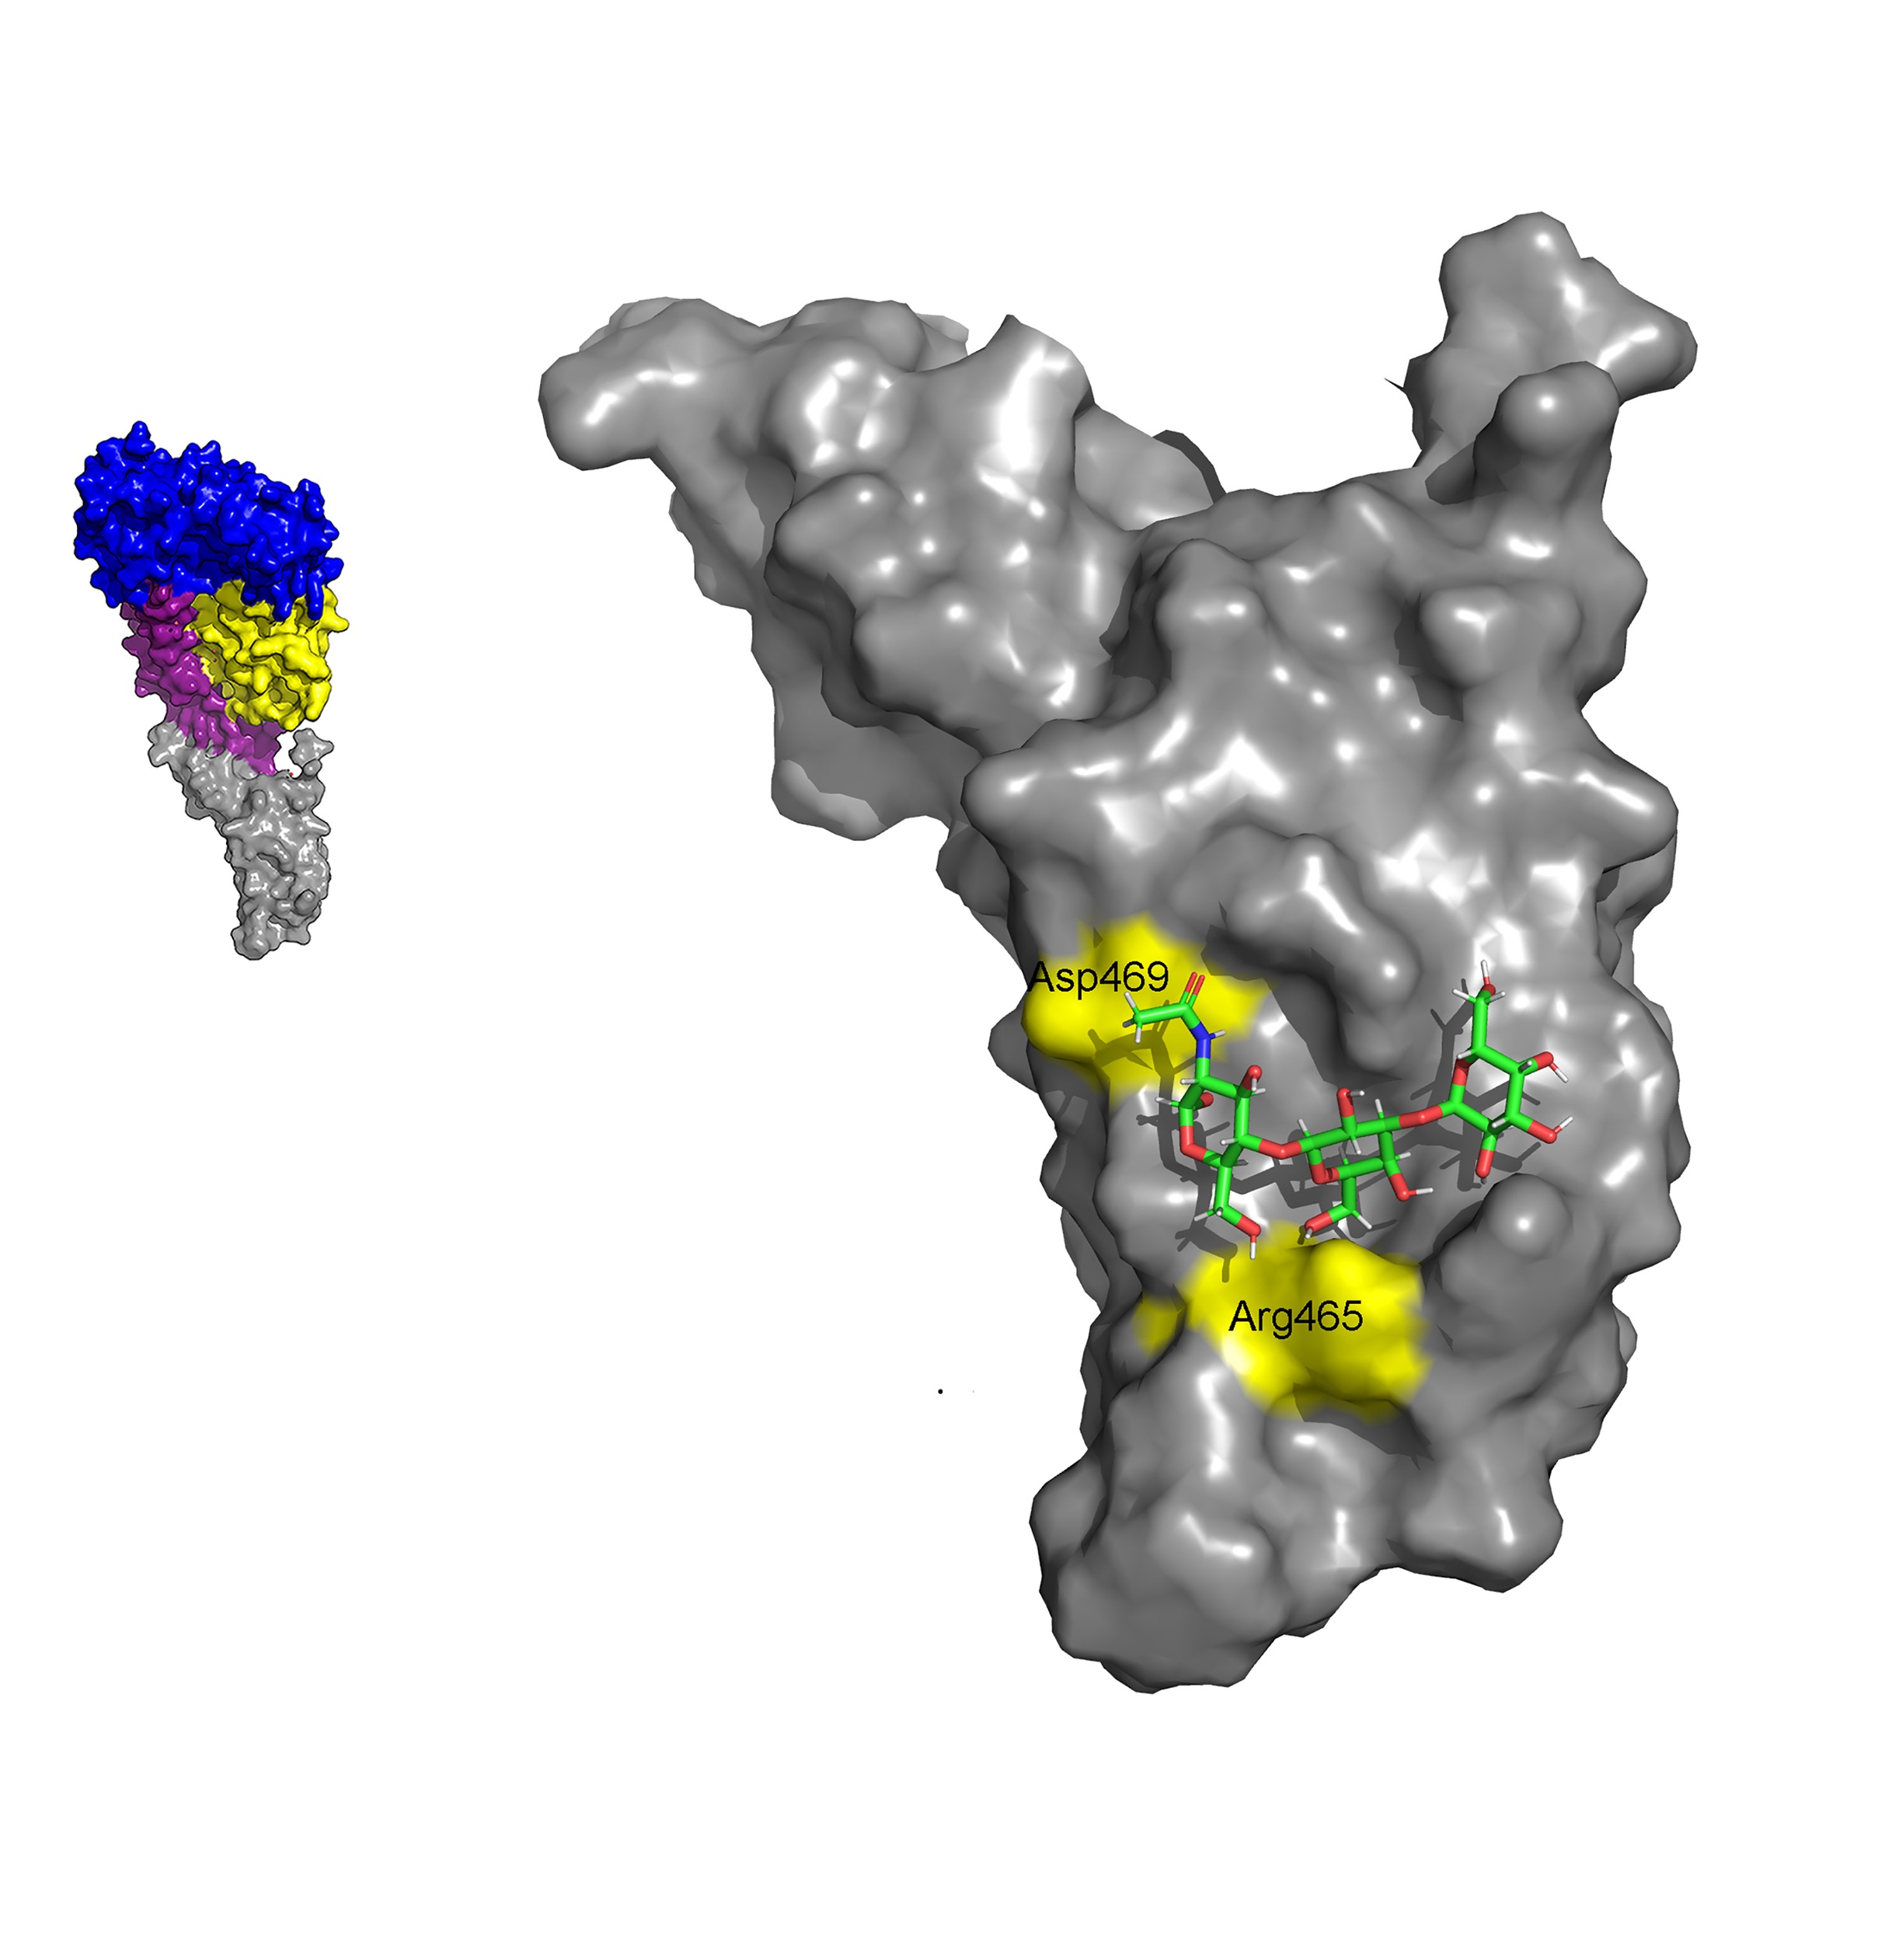 The structure of the CDC, suilysin, binding to a glycan receptor. This whole toxin is shown in the top left side. Domain 4 of the toxin (grey) is shown in complex with one of the glycans recognized by suilysin bottom right side.